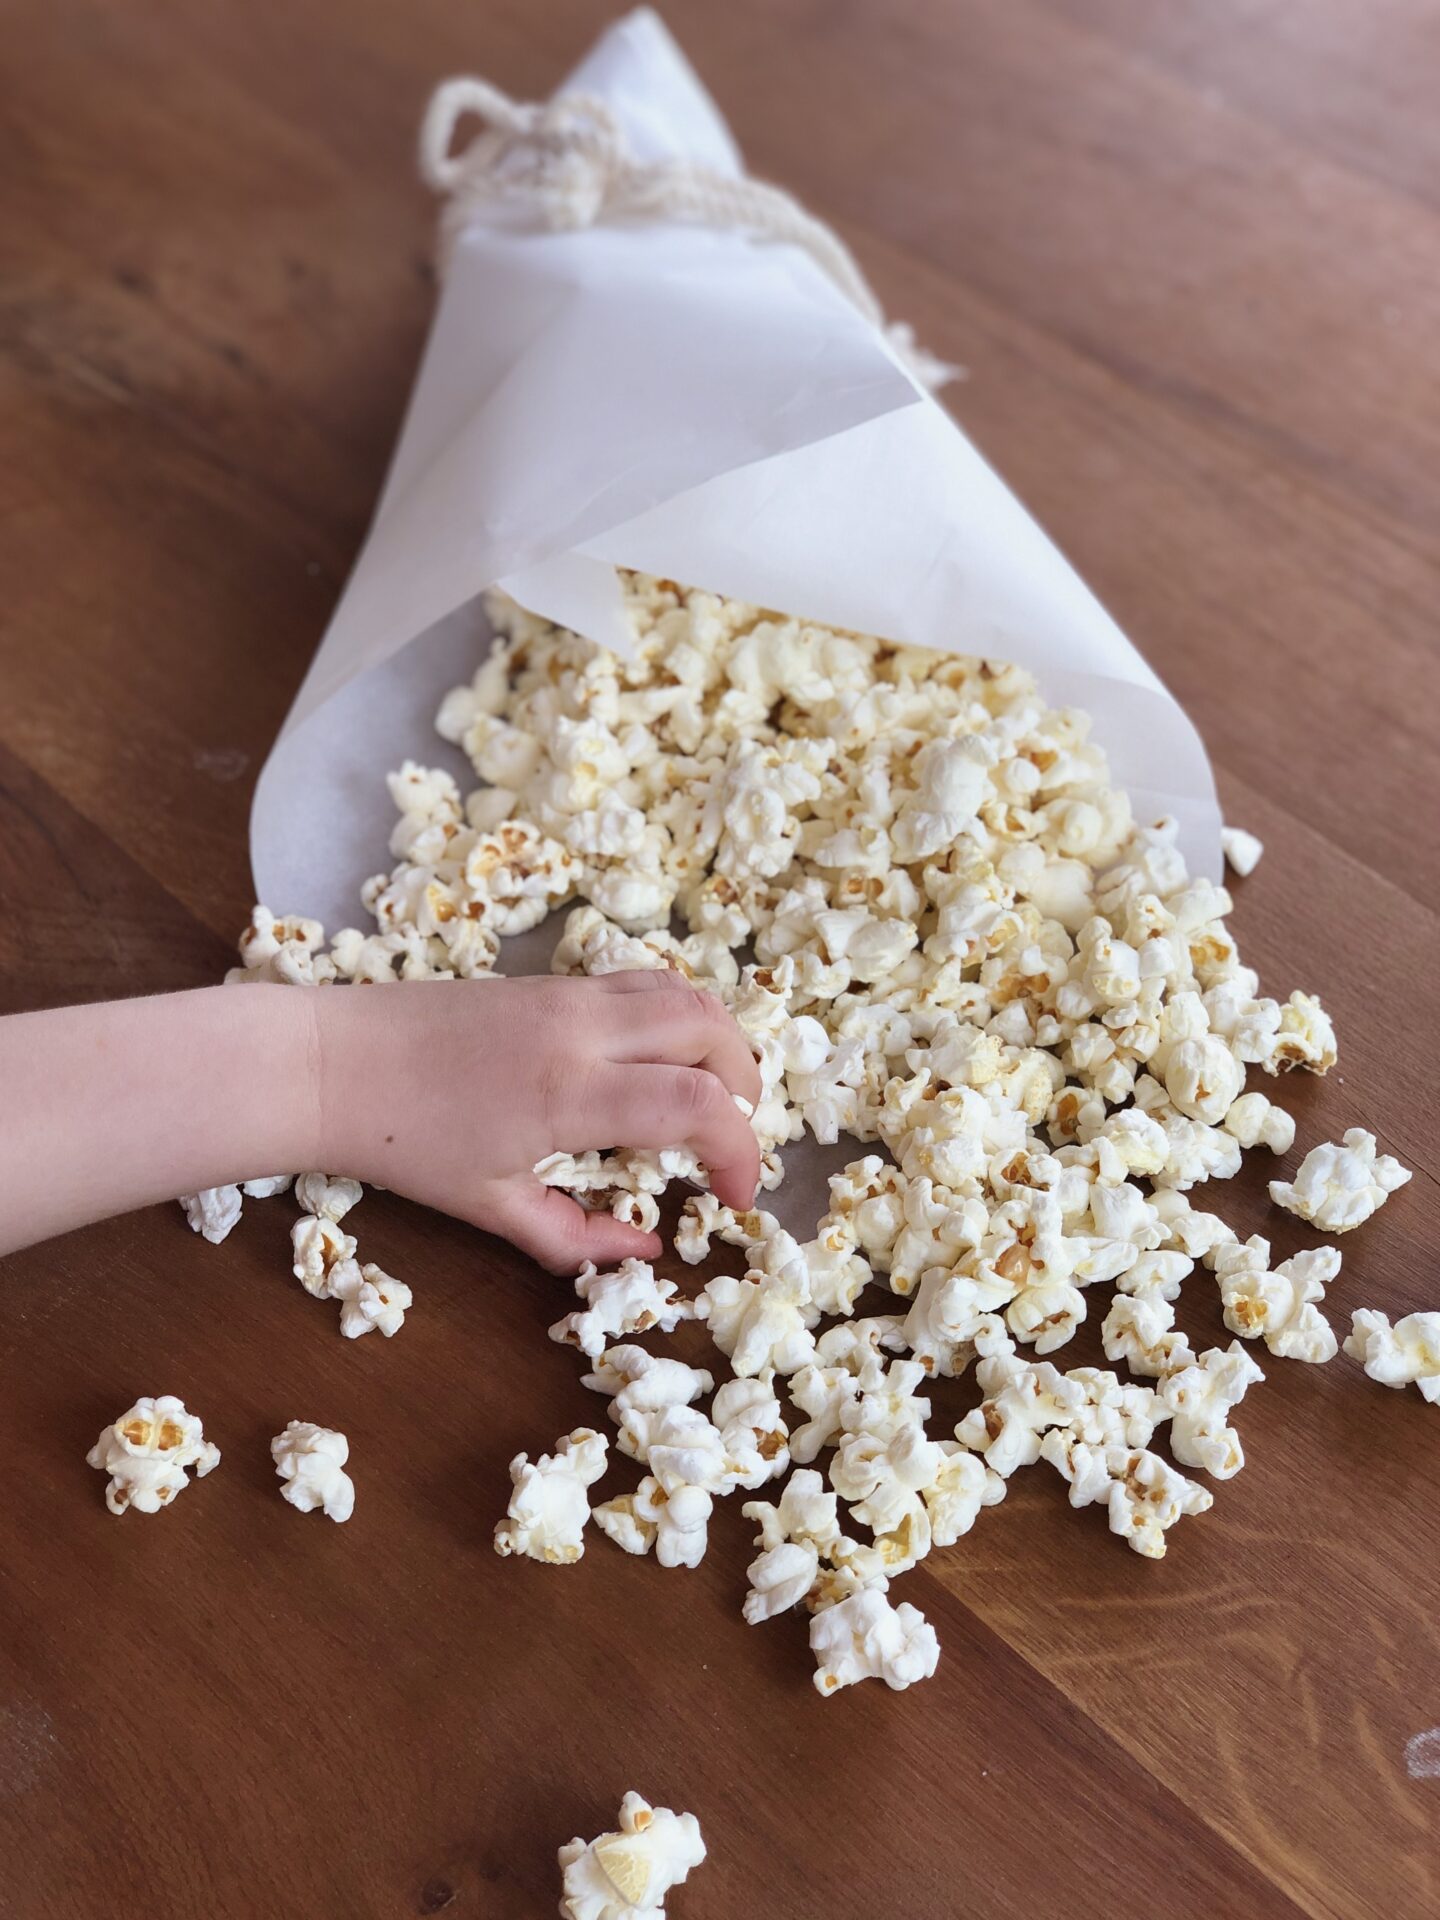 A little hand reaches into grab a handful of truffle popcorn from a paper cone of popcorn sitting on a wood table